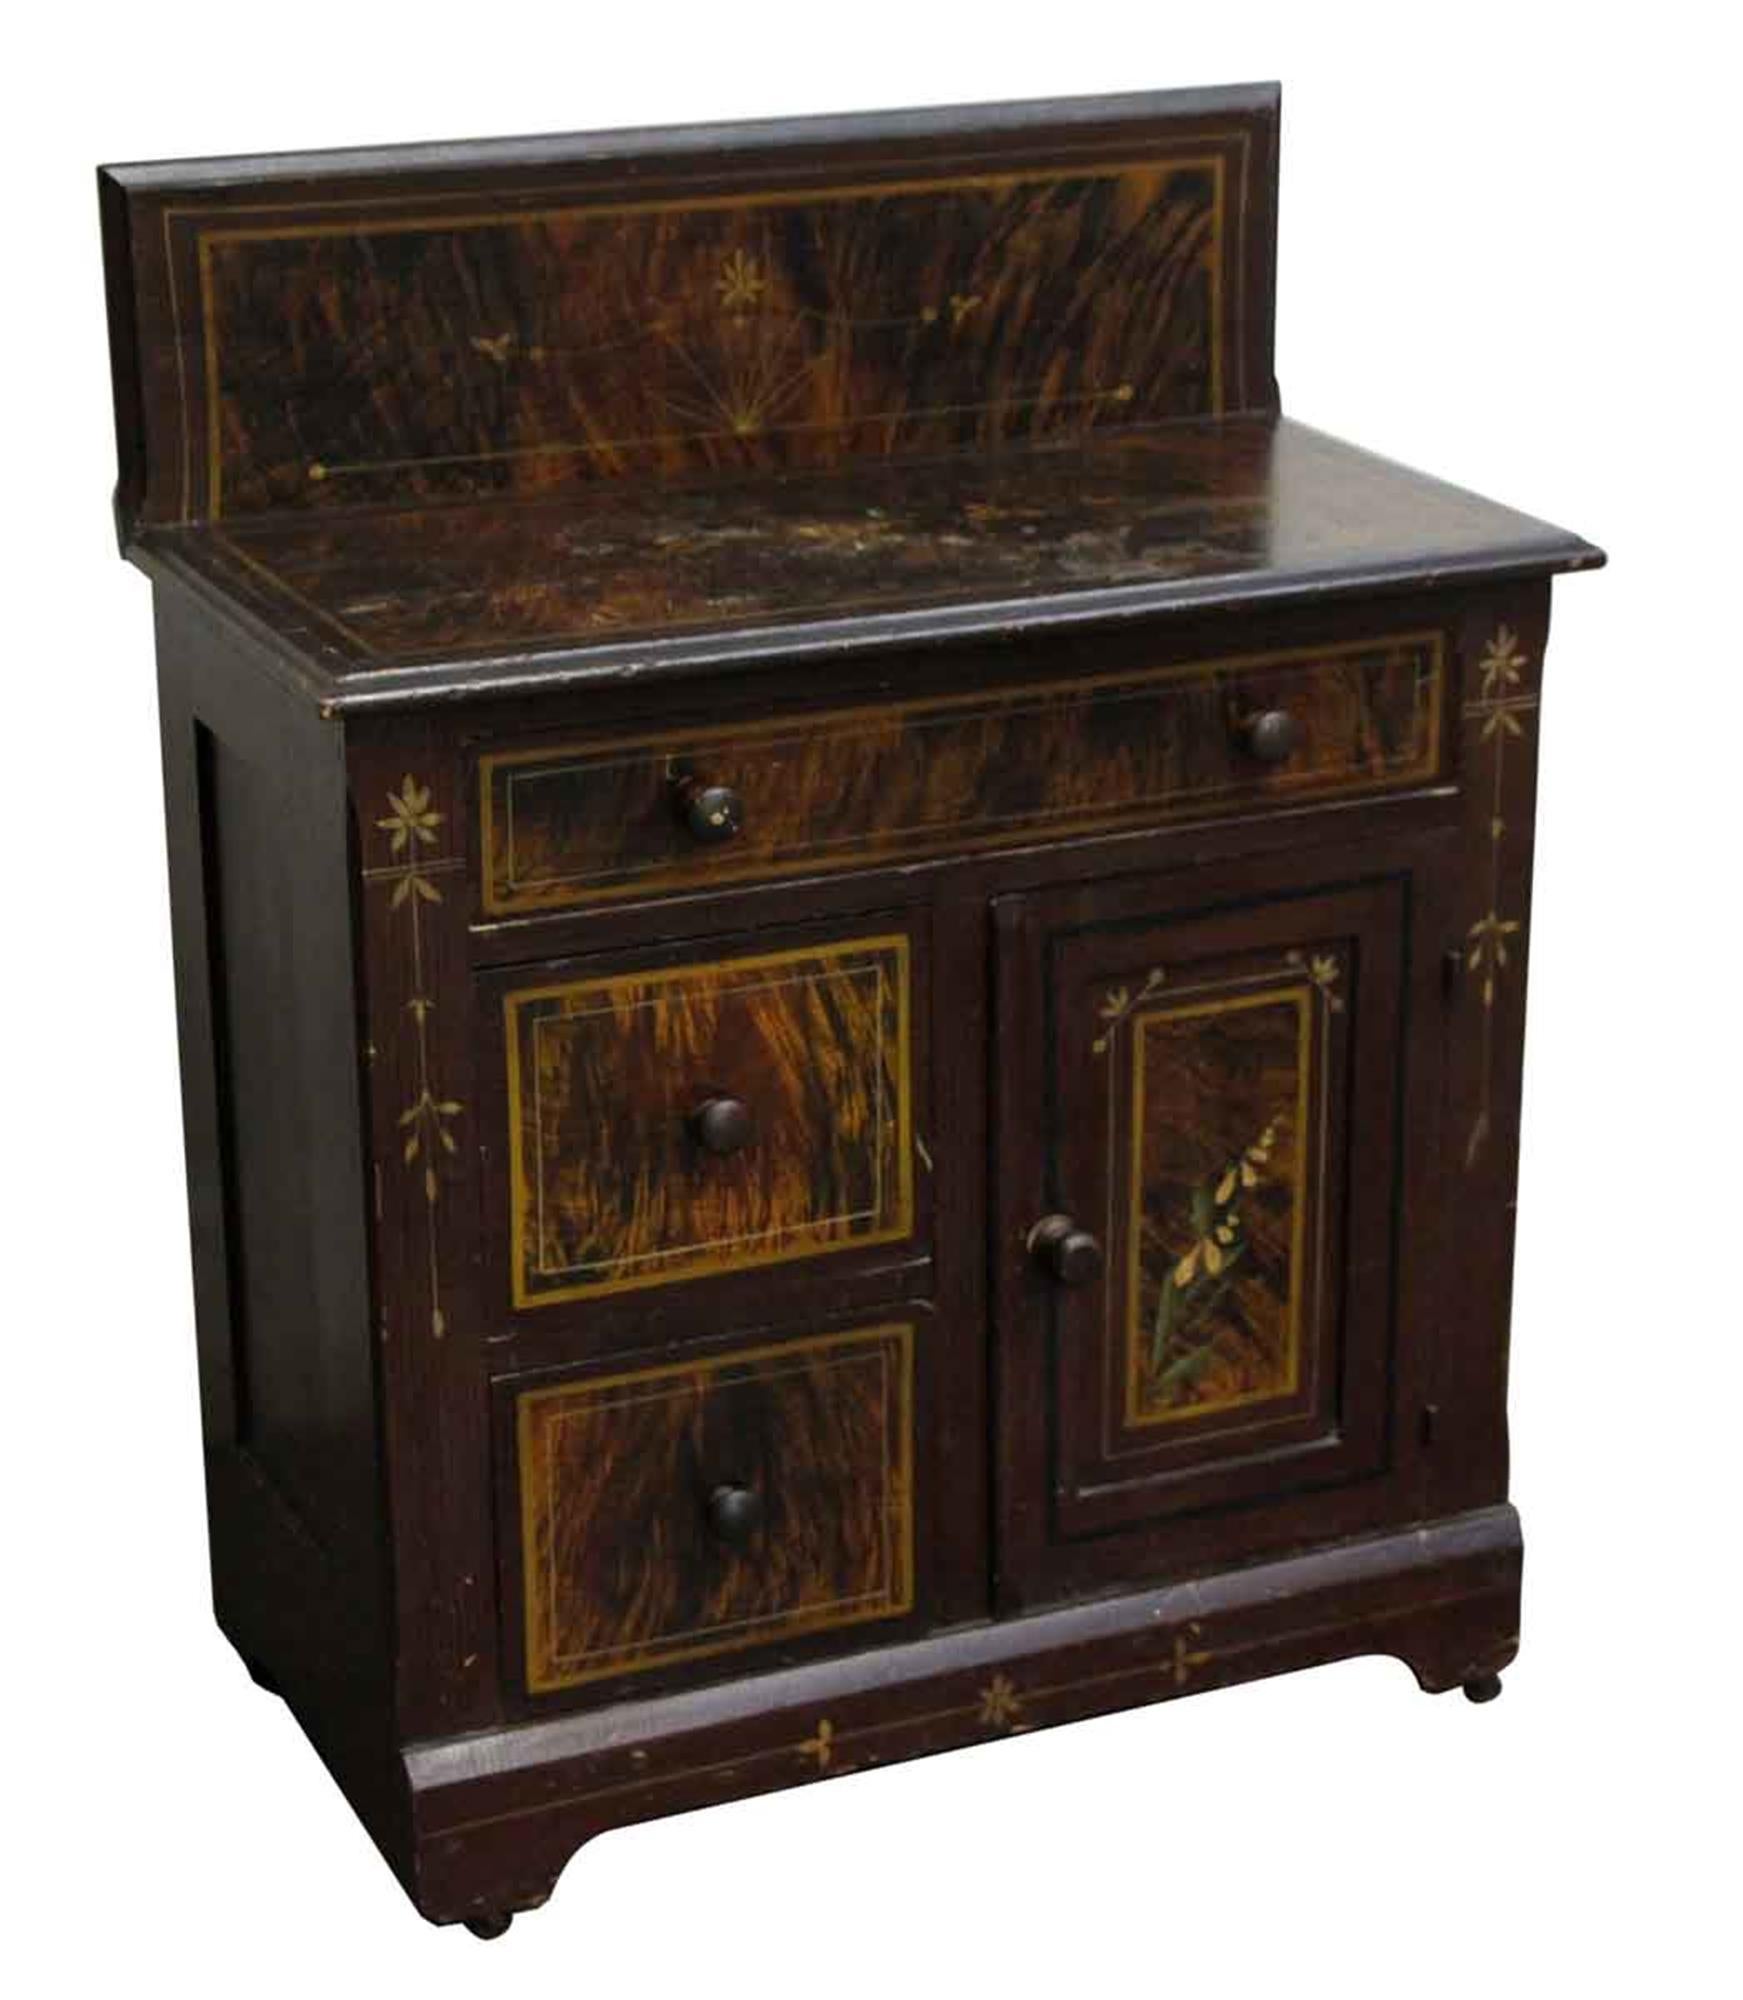 1880s dark wood tone wash stand with a hand painted decorative finish. This shows wear and has some chips in the wood from age and use. This can be seen at our 400 Gilligan St location in Scranton, PA.